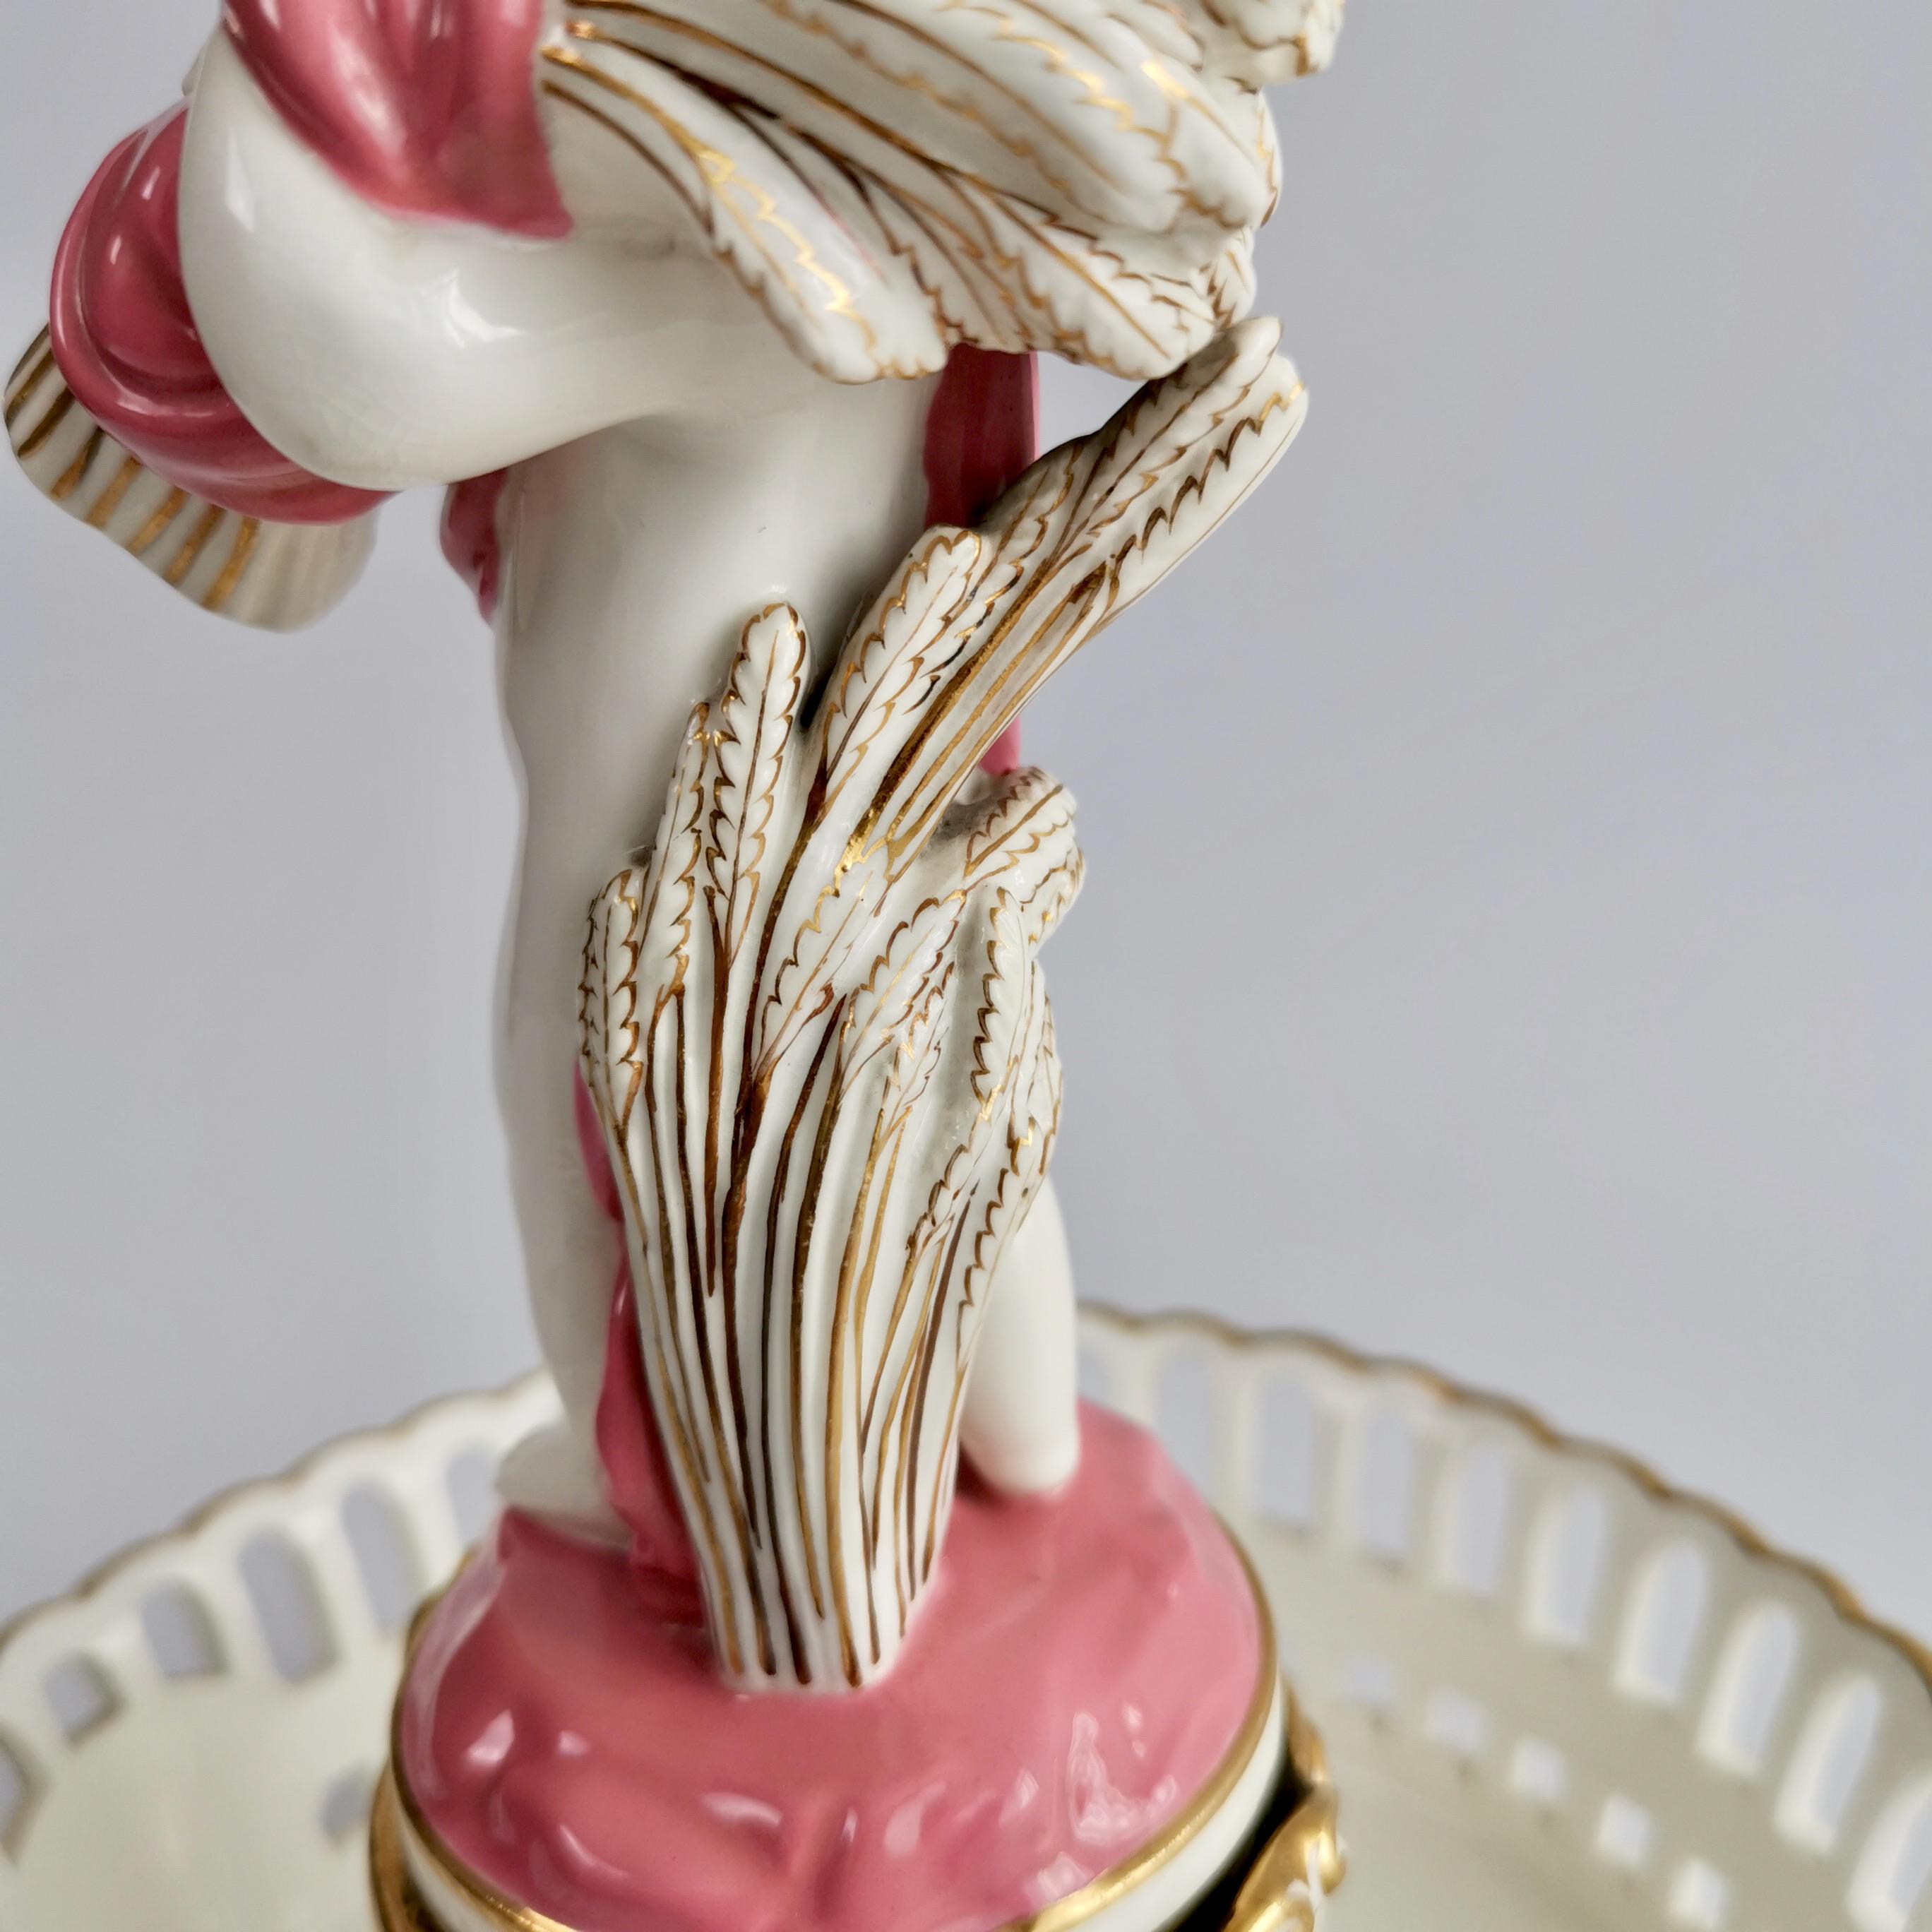 Late 19th Century Minton Porcelain Tazza Dish, White and Pink with Cherub, 1891